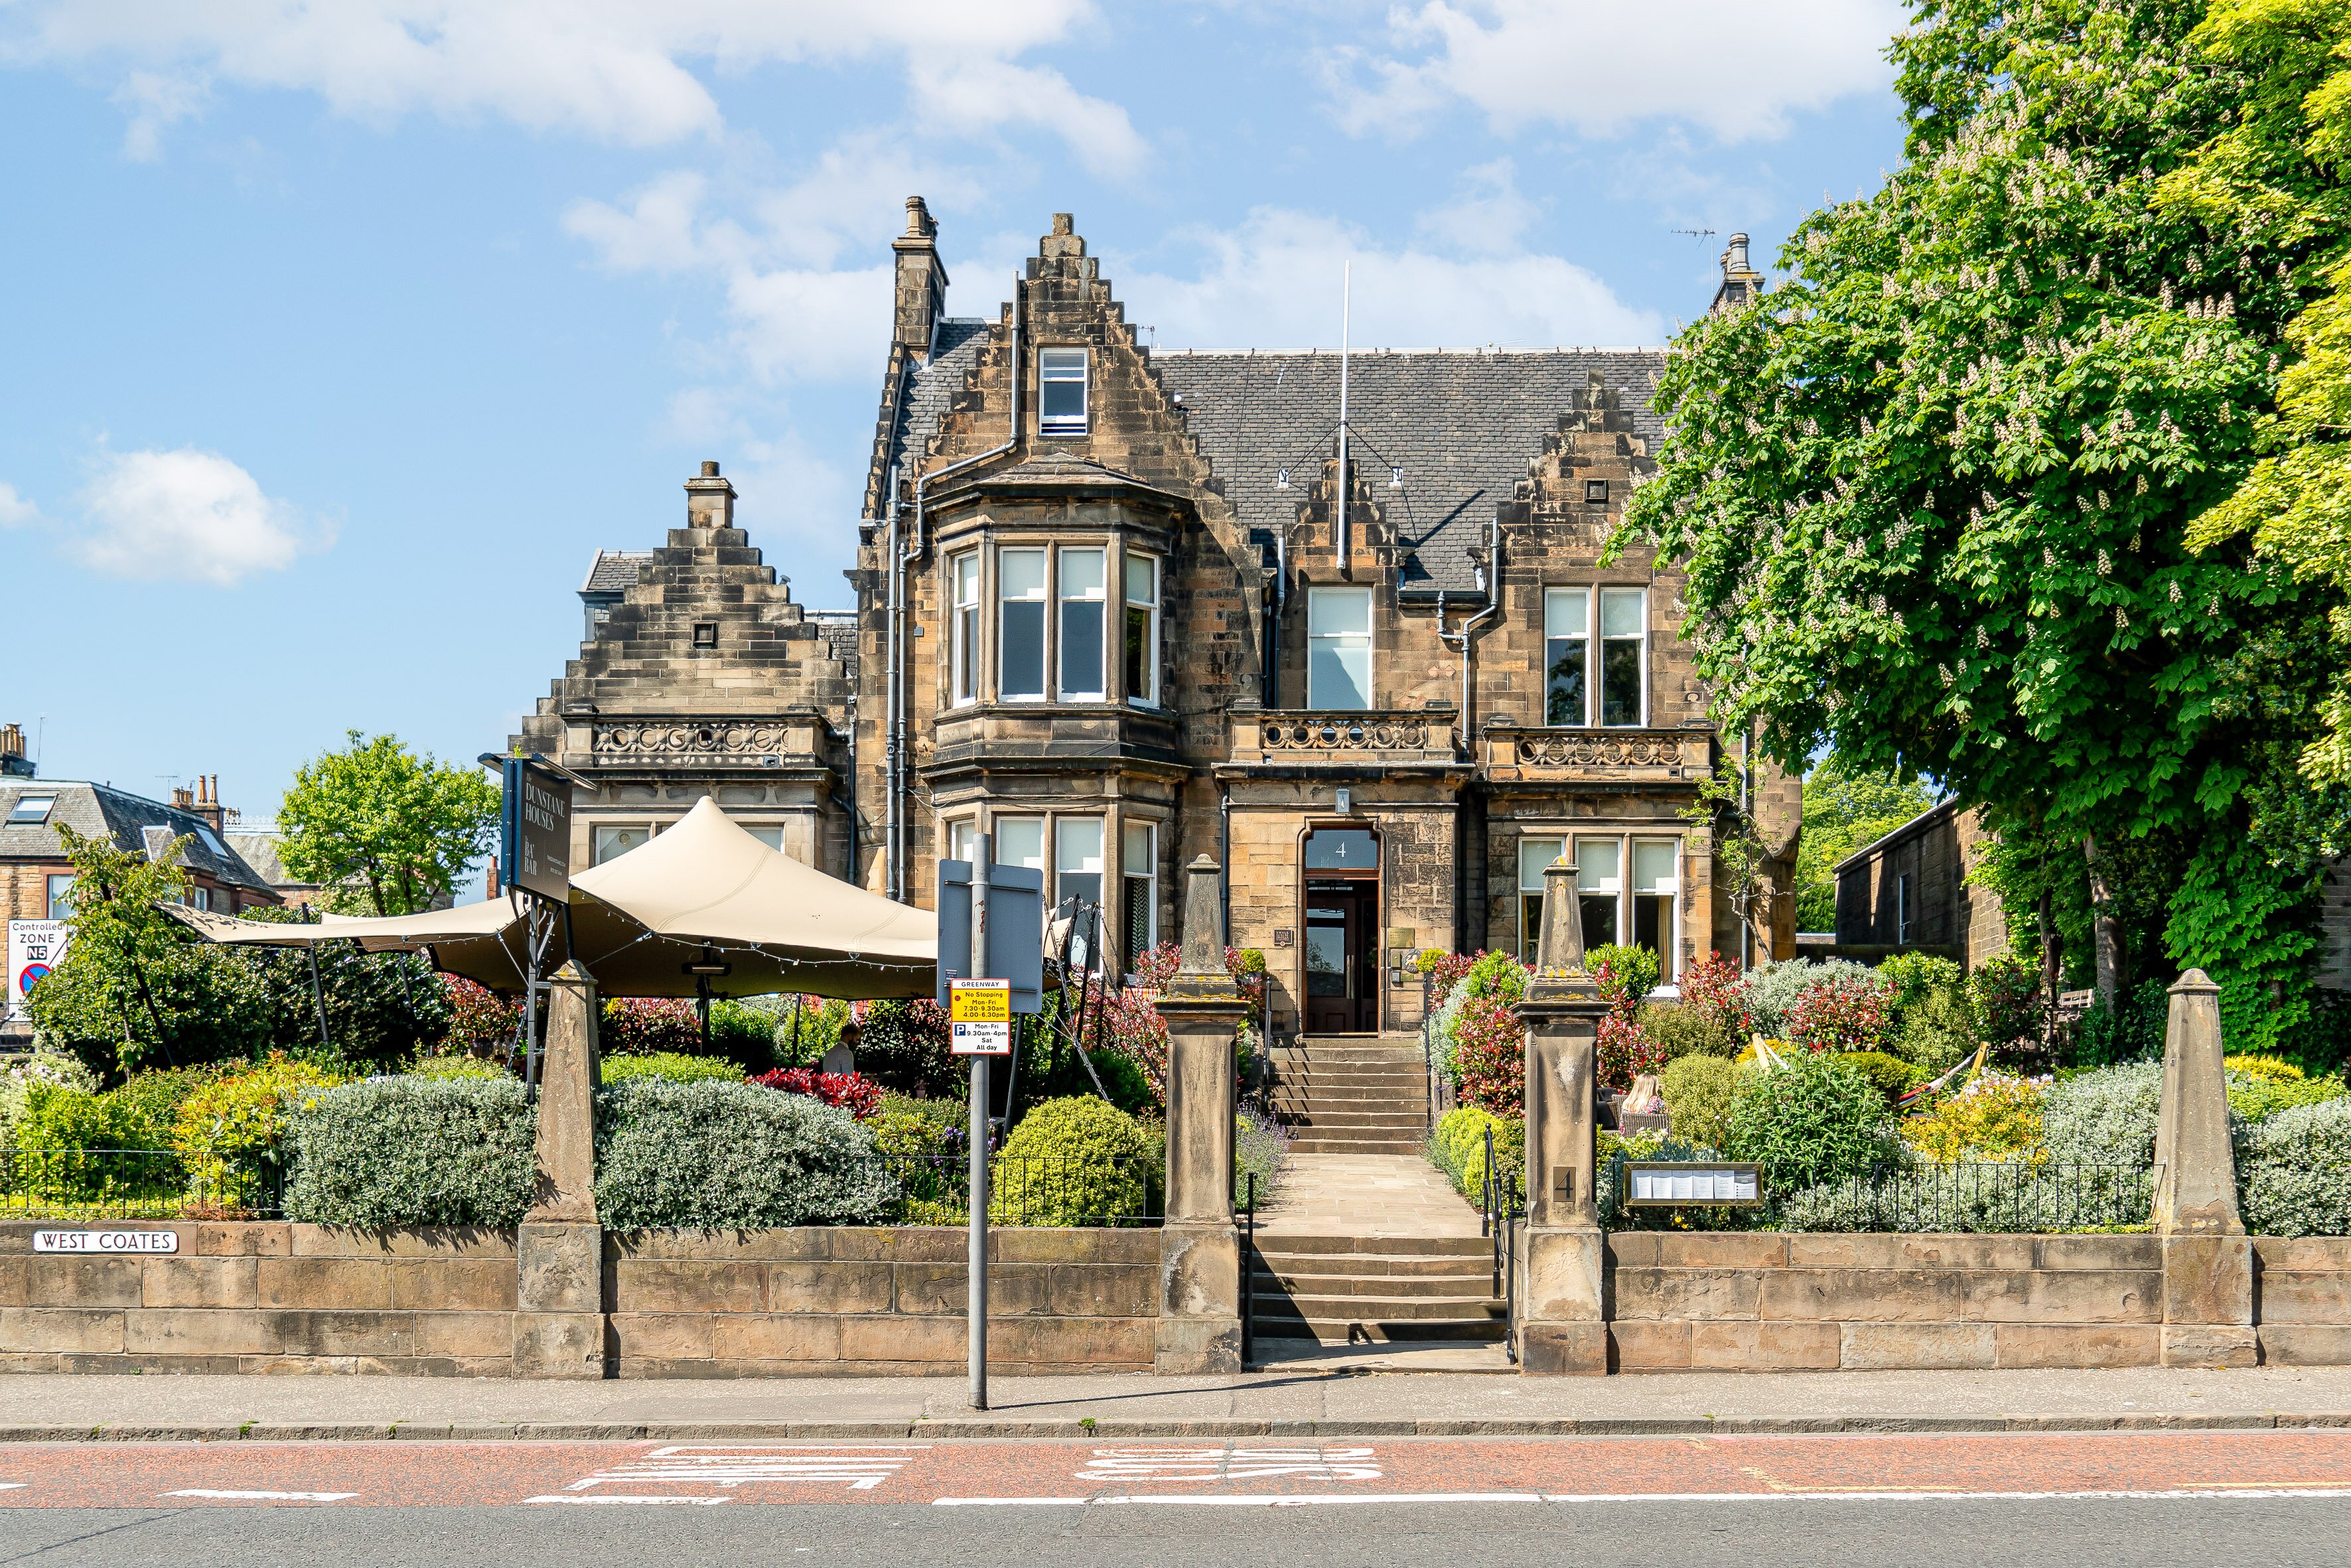 Dunstane Houses hotel sold off guide price of £7.5m